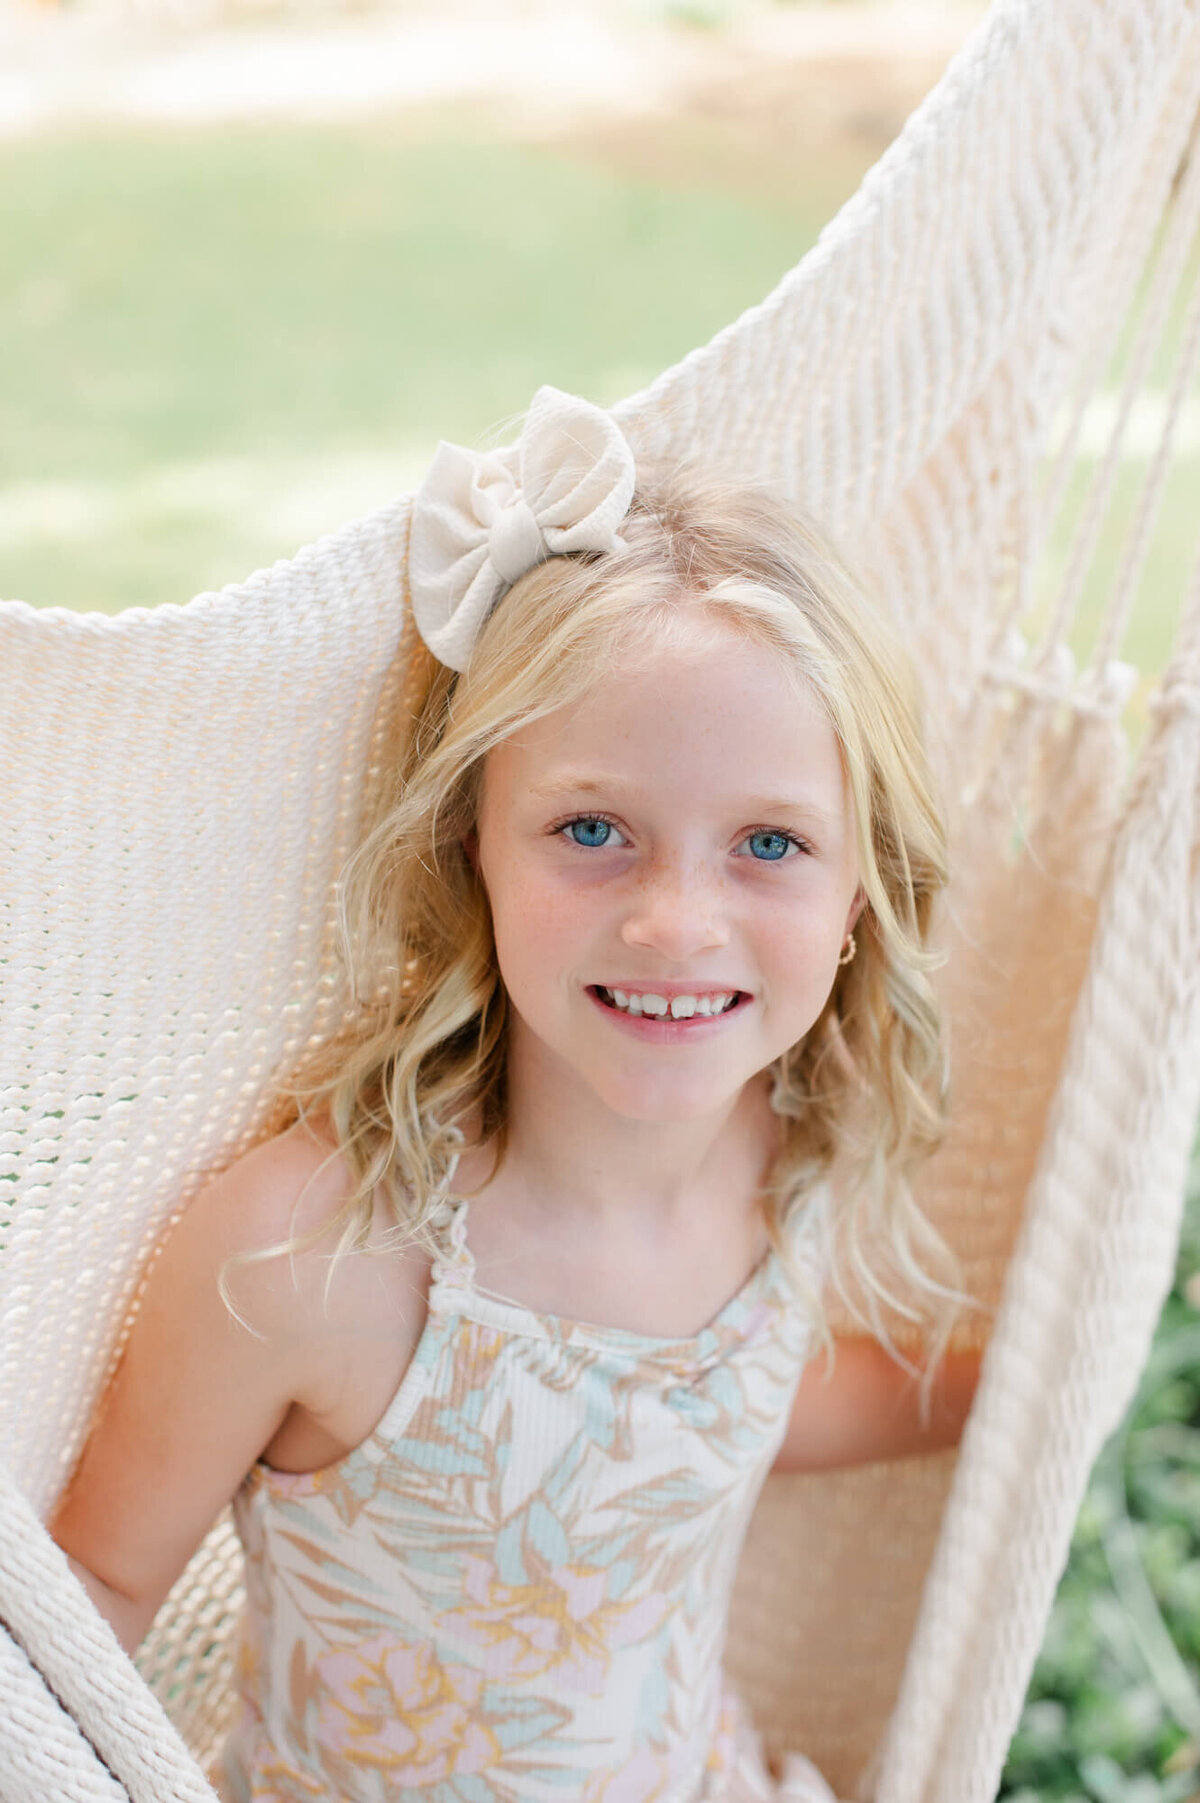 Young girl smiling at the camera while sitting in a hammock